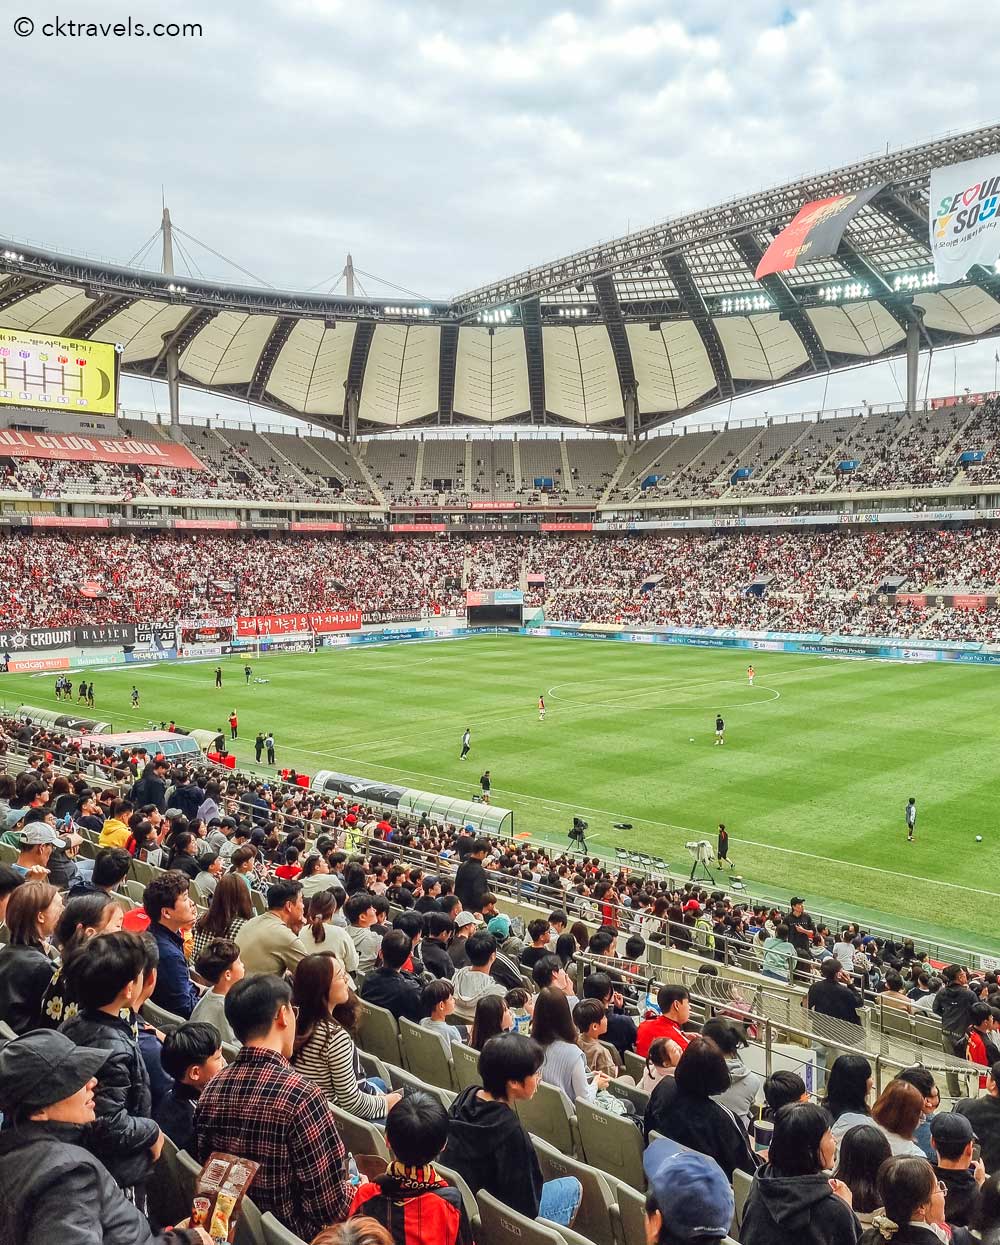 K League South Korea - How to get FC Seoul Tickets at Seoul World Cup Stadium